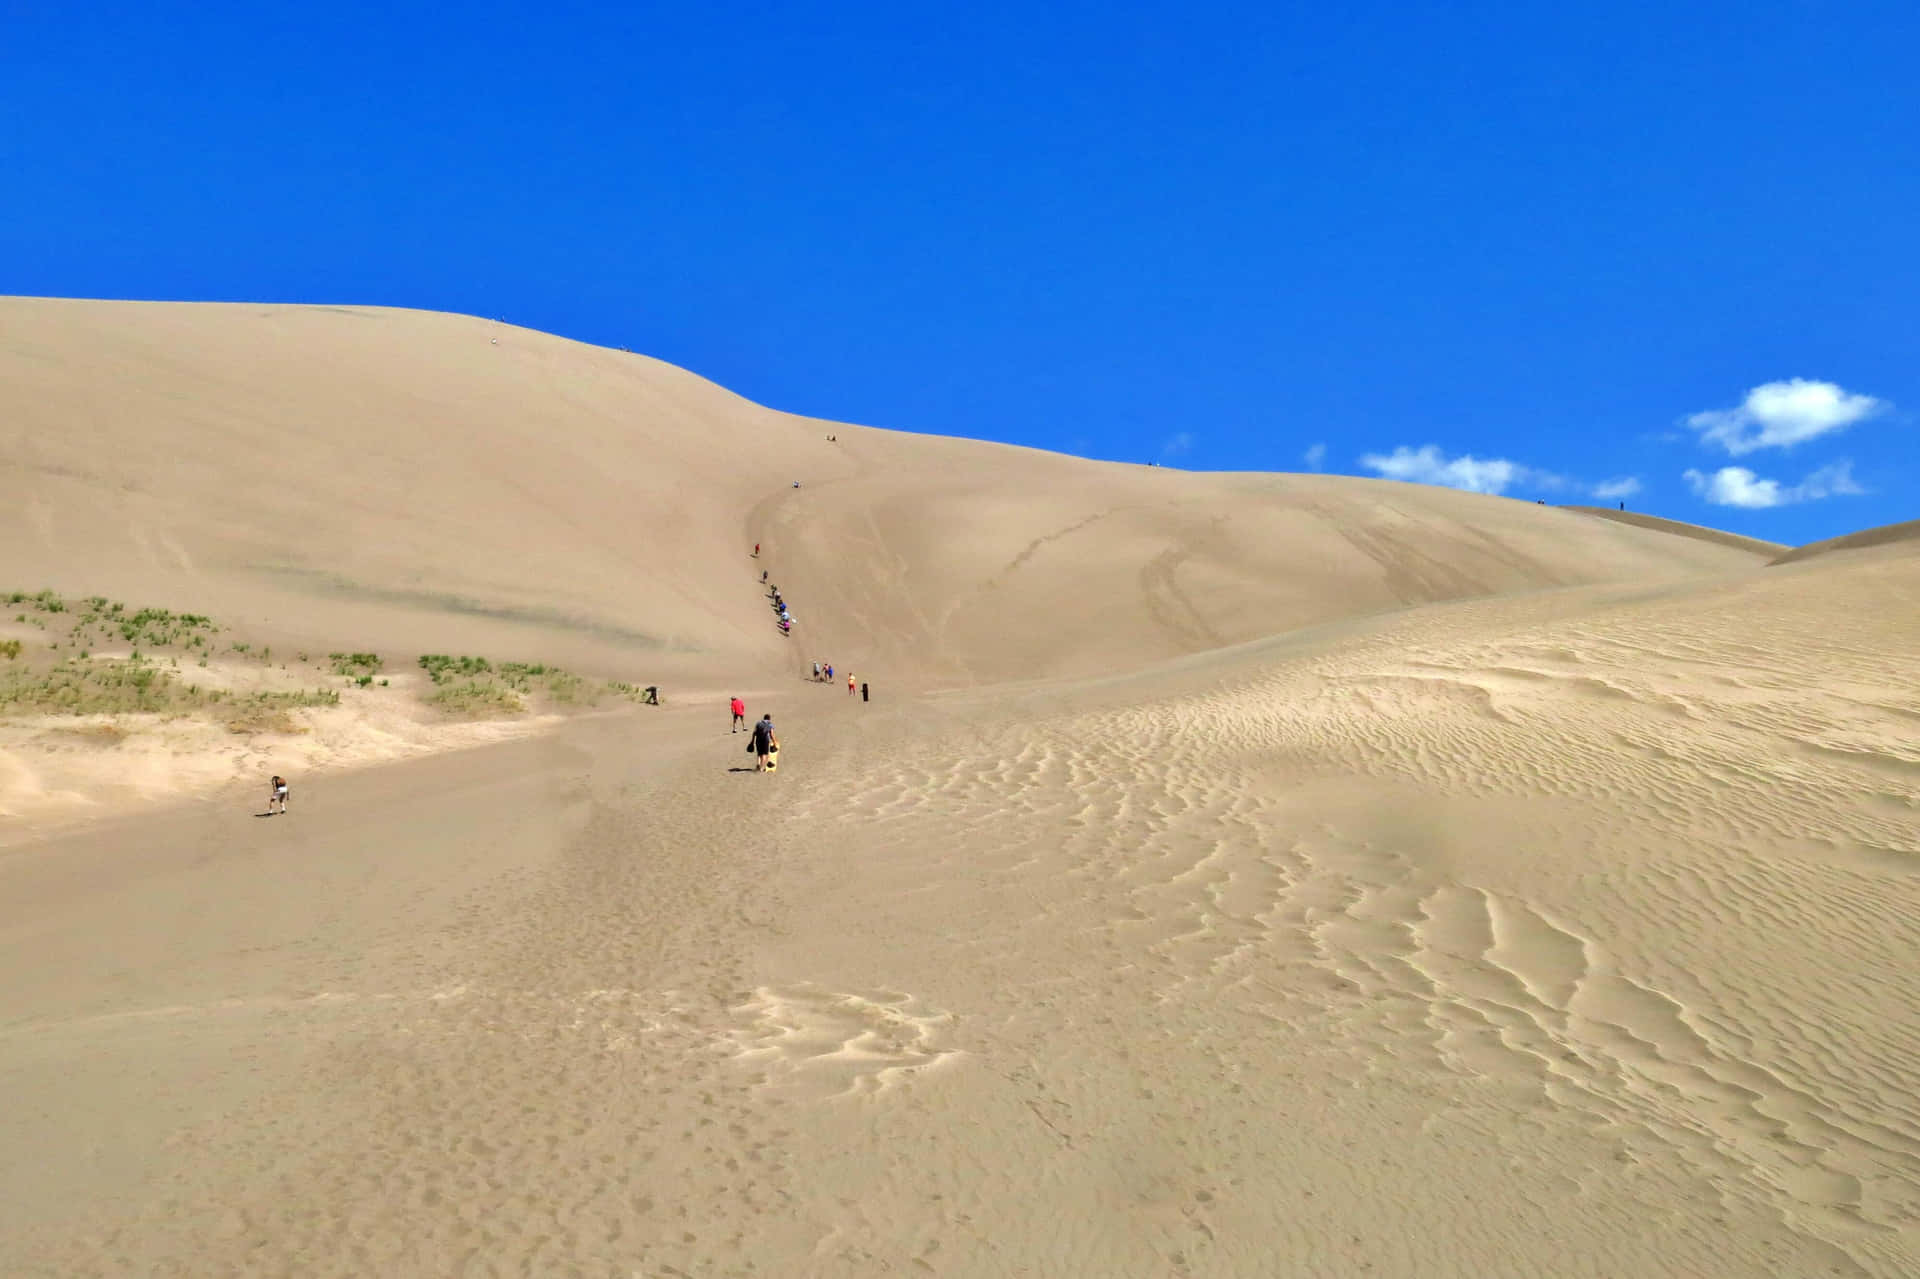 People Walking On A Sand Dune In The Desert